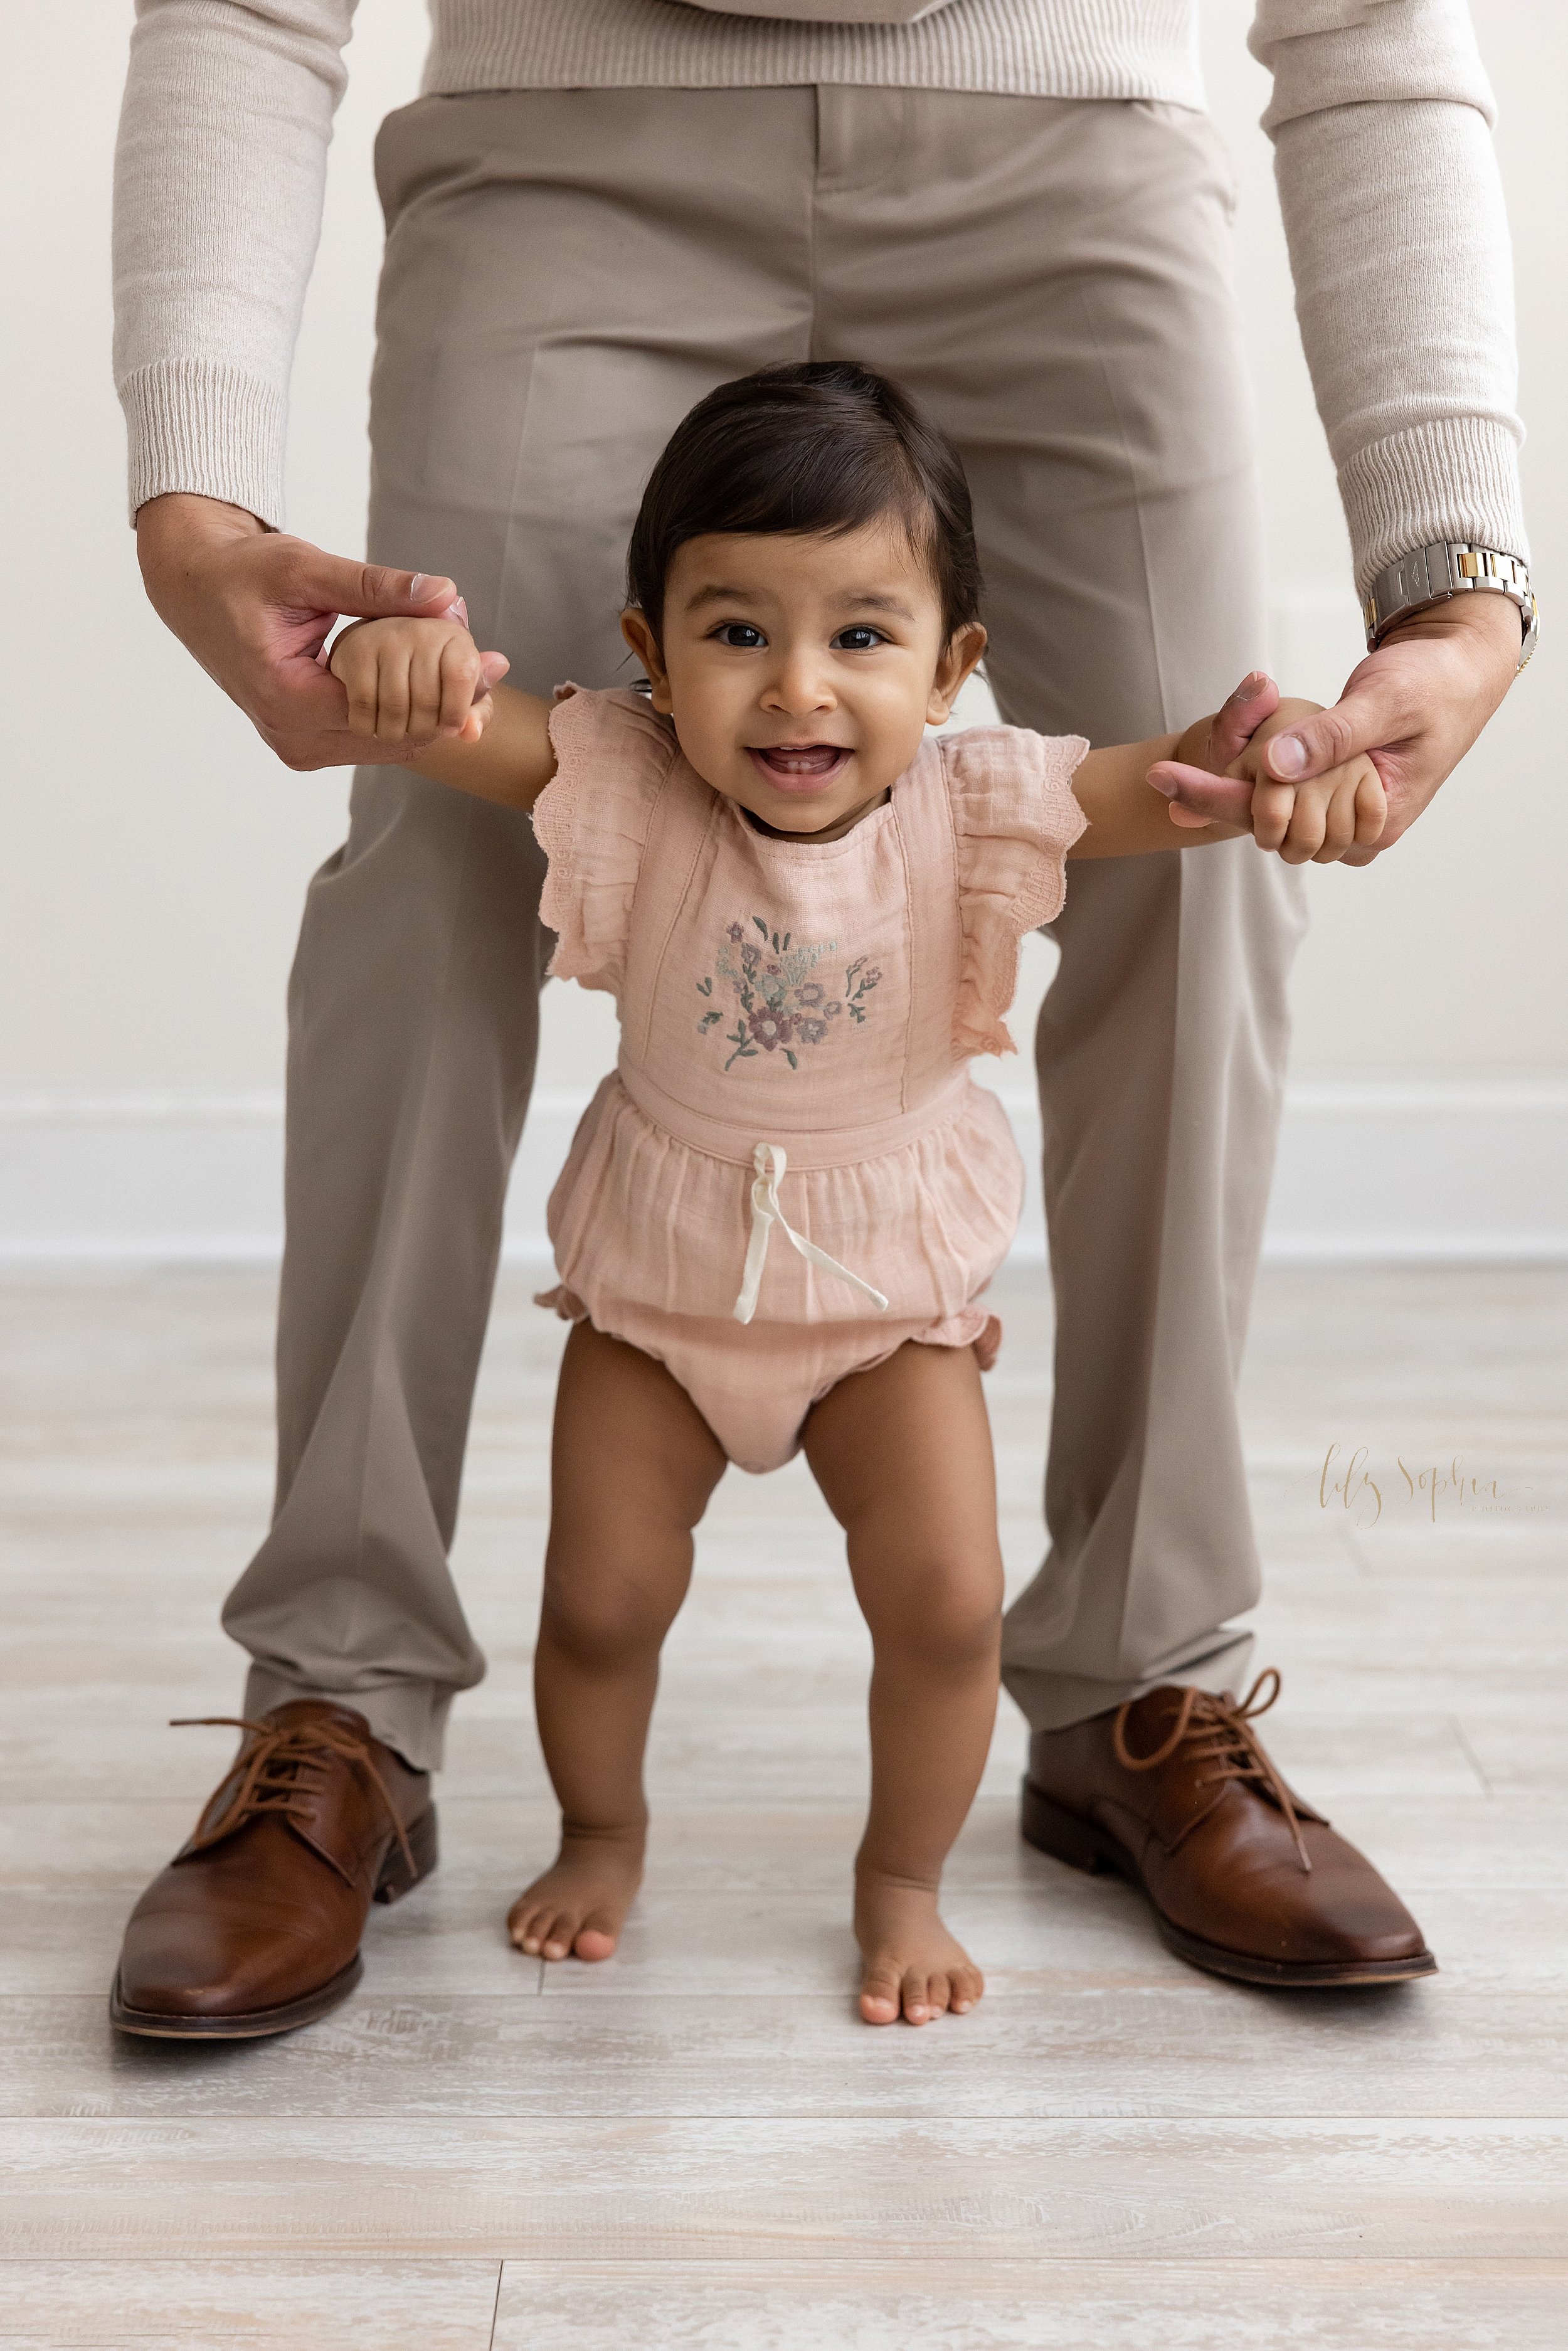  First birthday portrait of a one year old little girl walking barefoot in a natural light studio while holding onto her father’s index fingers as he walks behind her taken near Midtown in Atlanta, Georgia. 